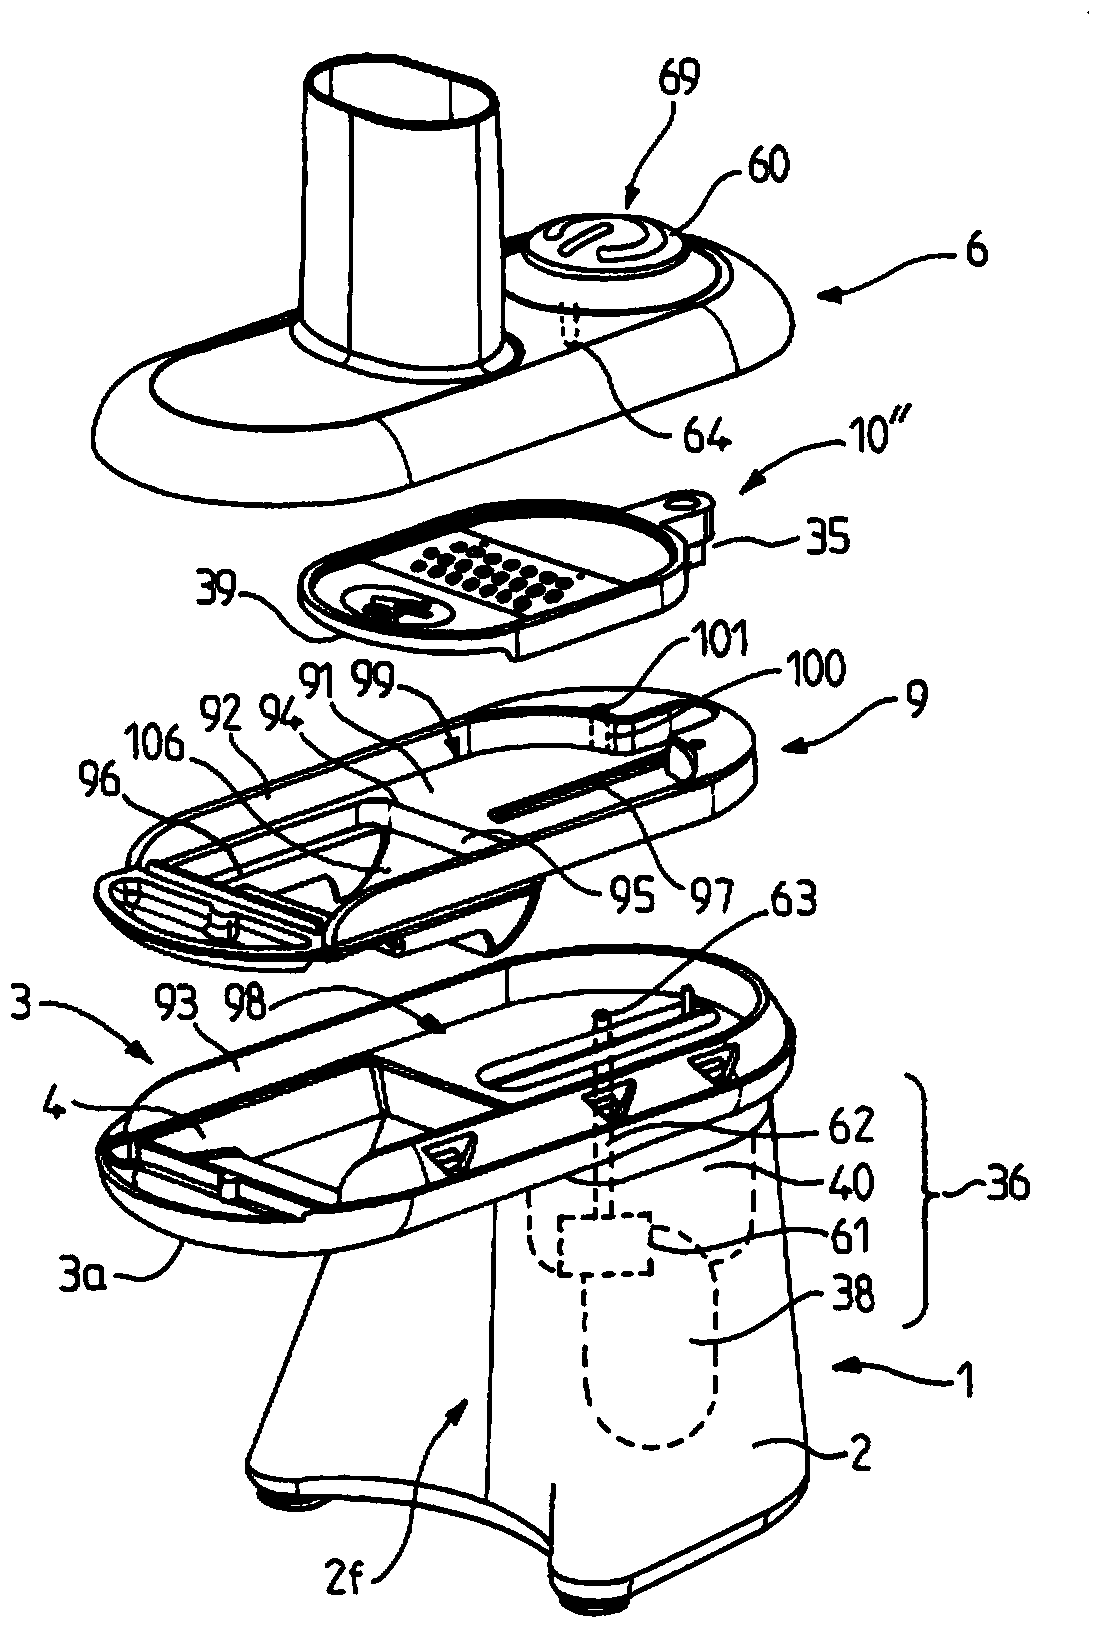 Food-preparation appliance having a mounting for storing removable work accessories